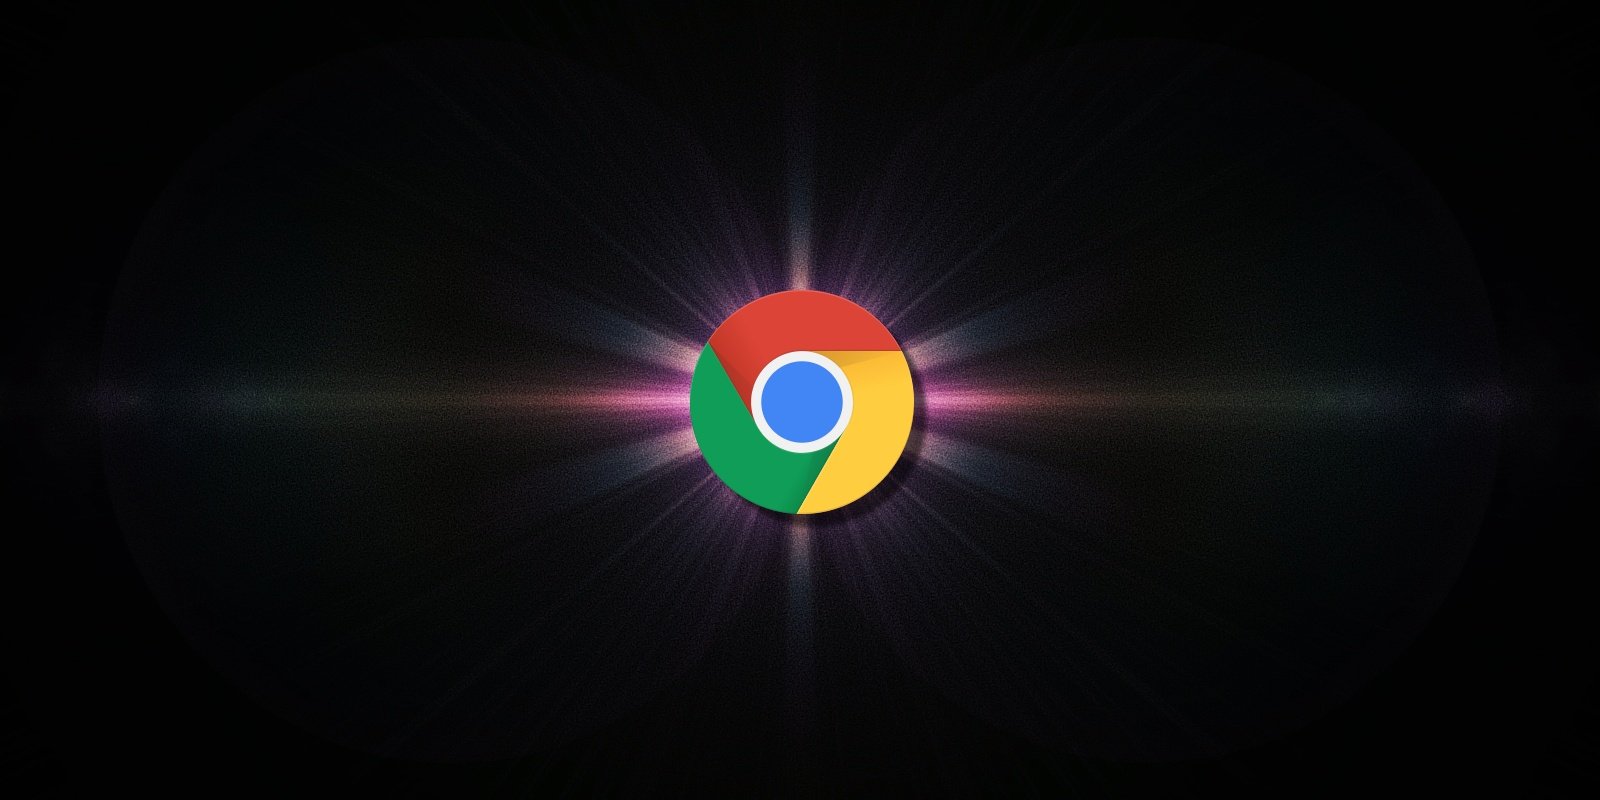 Google is enabling Chrome real-time phishing protection for everyone – Source: www.bleepingcomputer.com